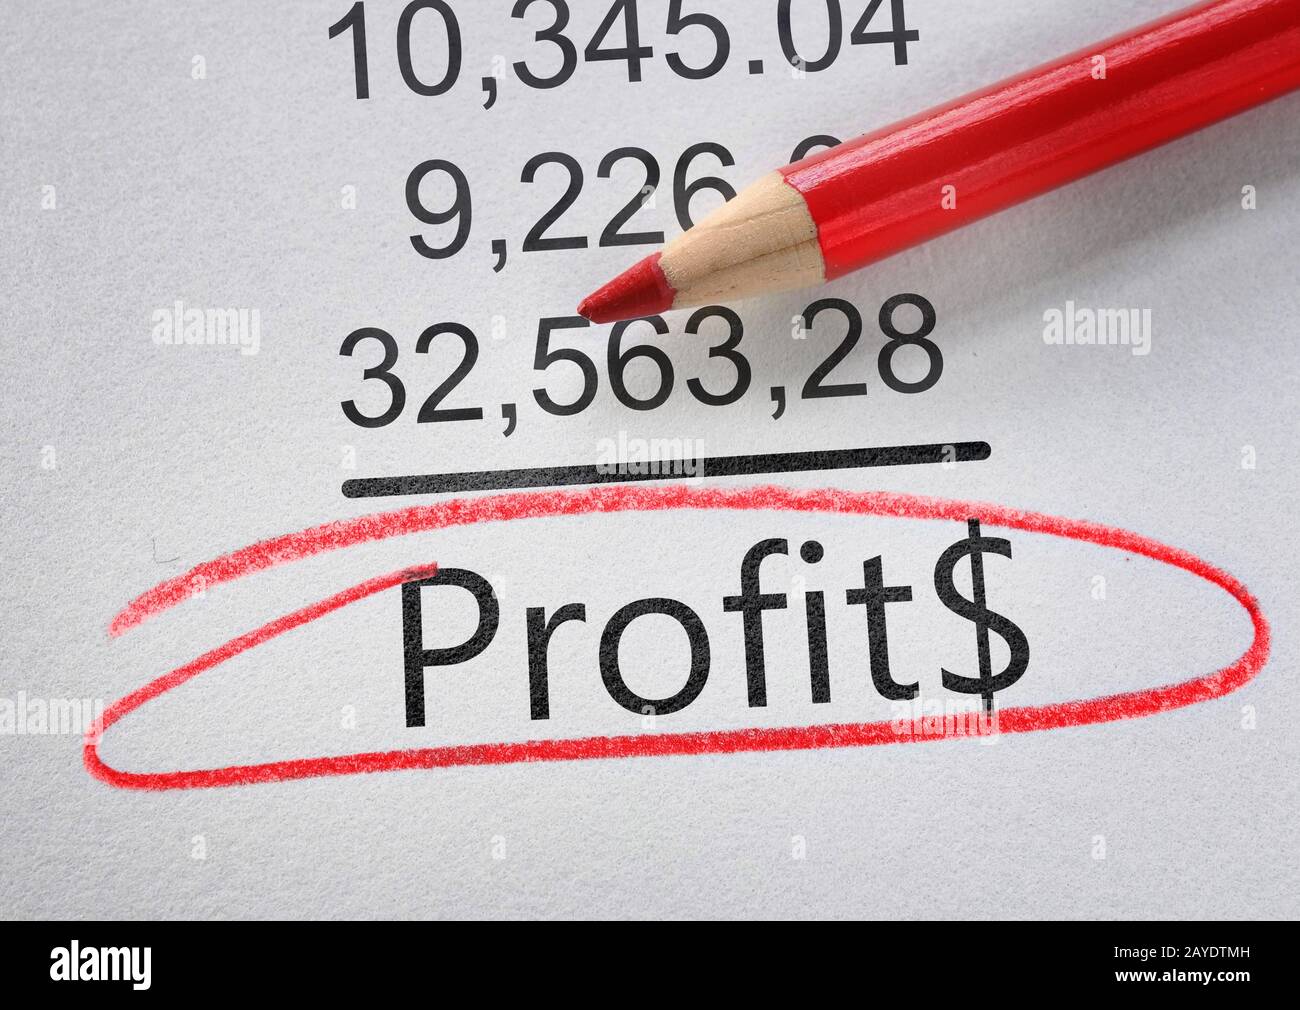 Profit text accounting numbers Stock Photo